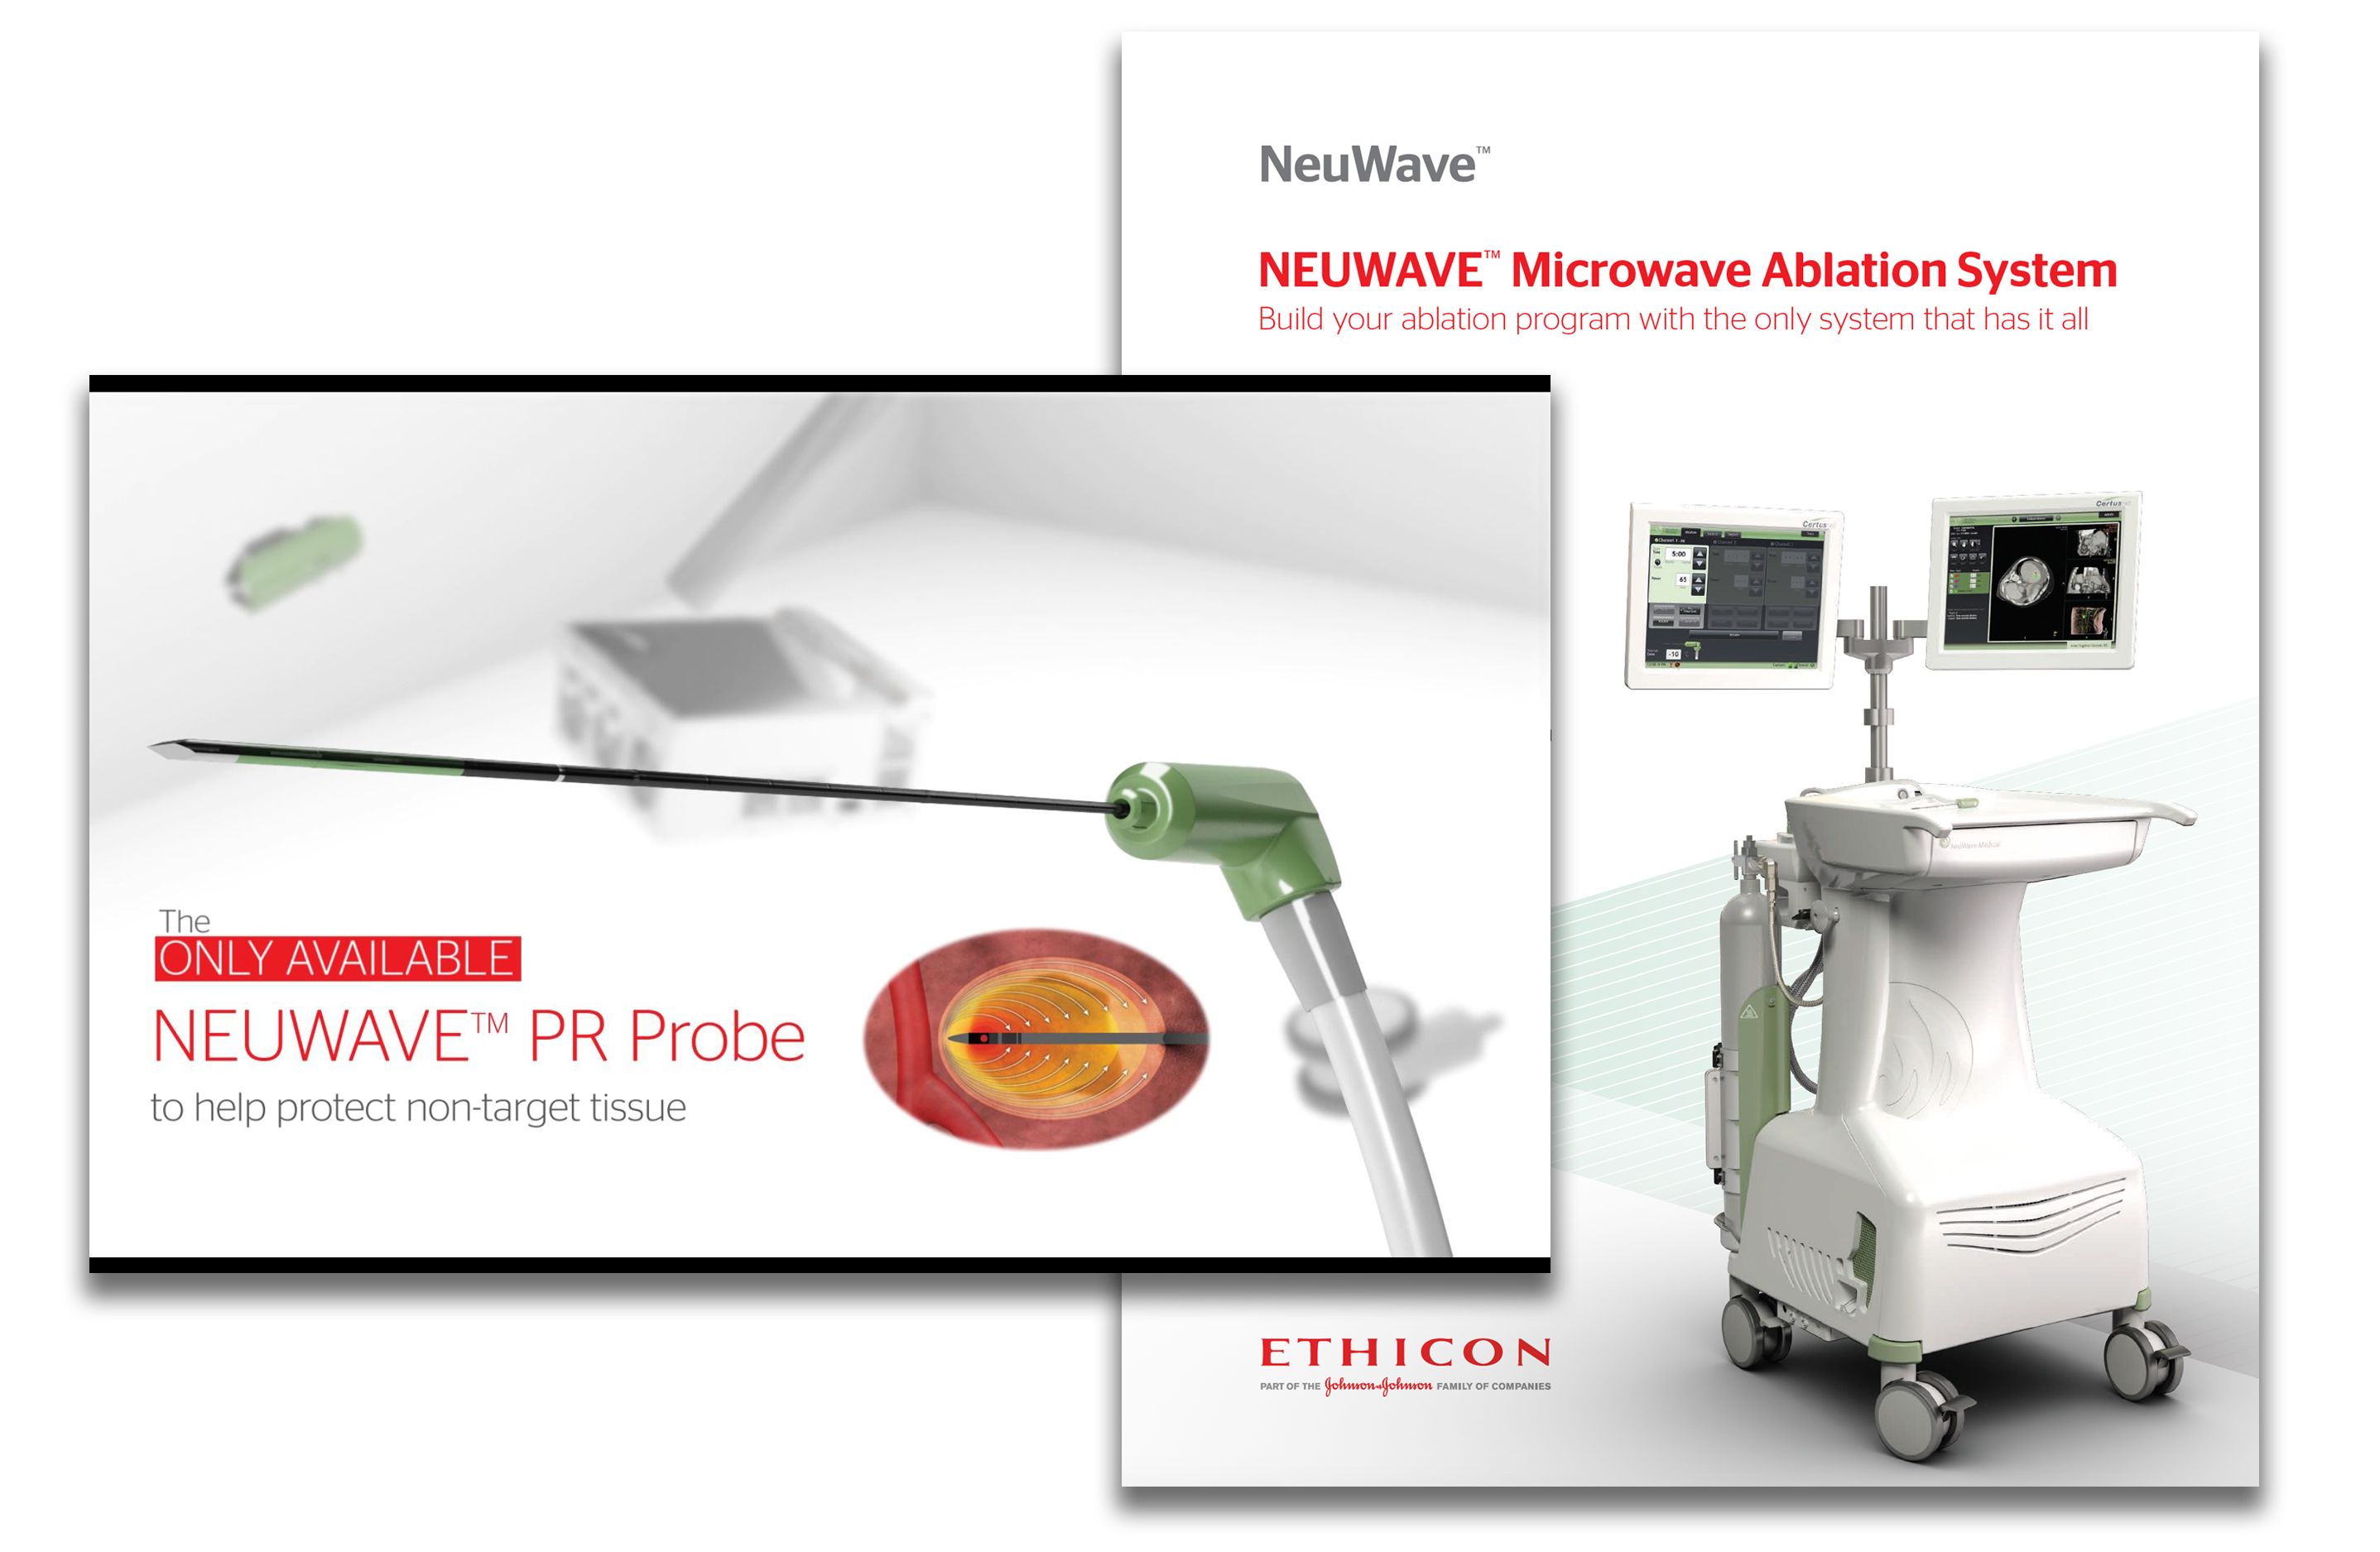 Join the microwave ablation movement | Ethicon